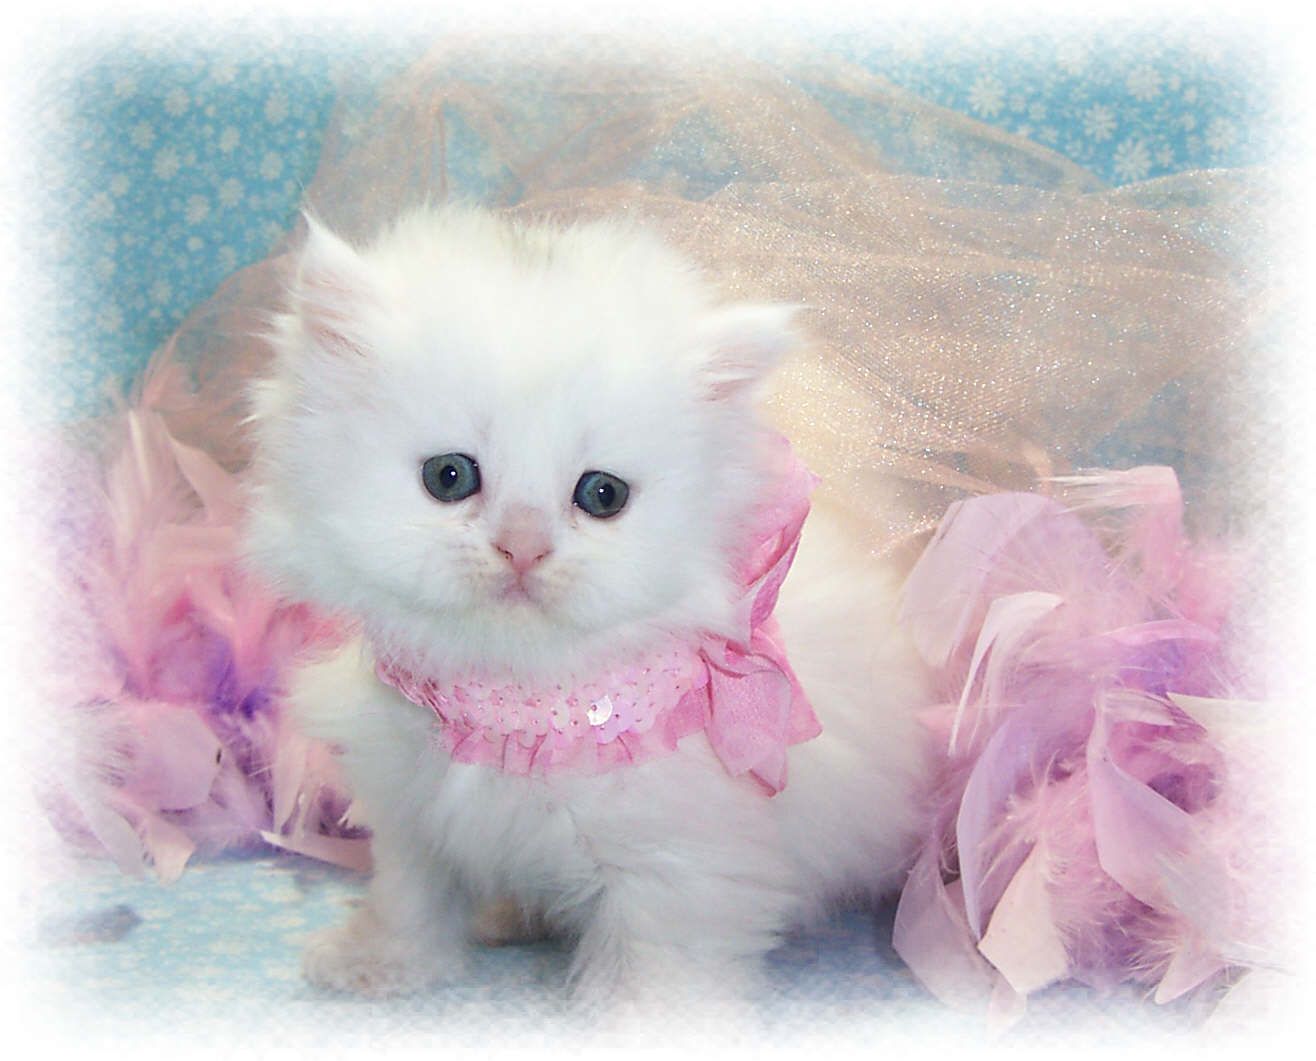 cute cat Picture. Kittens cutest baby, Cute cats, Pretty cats